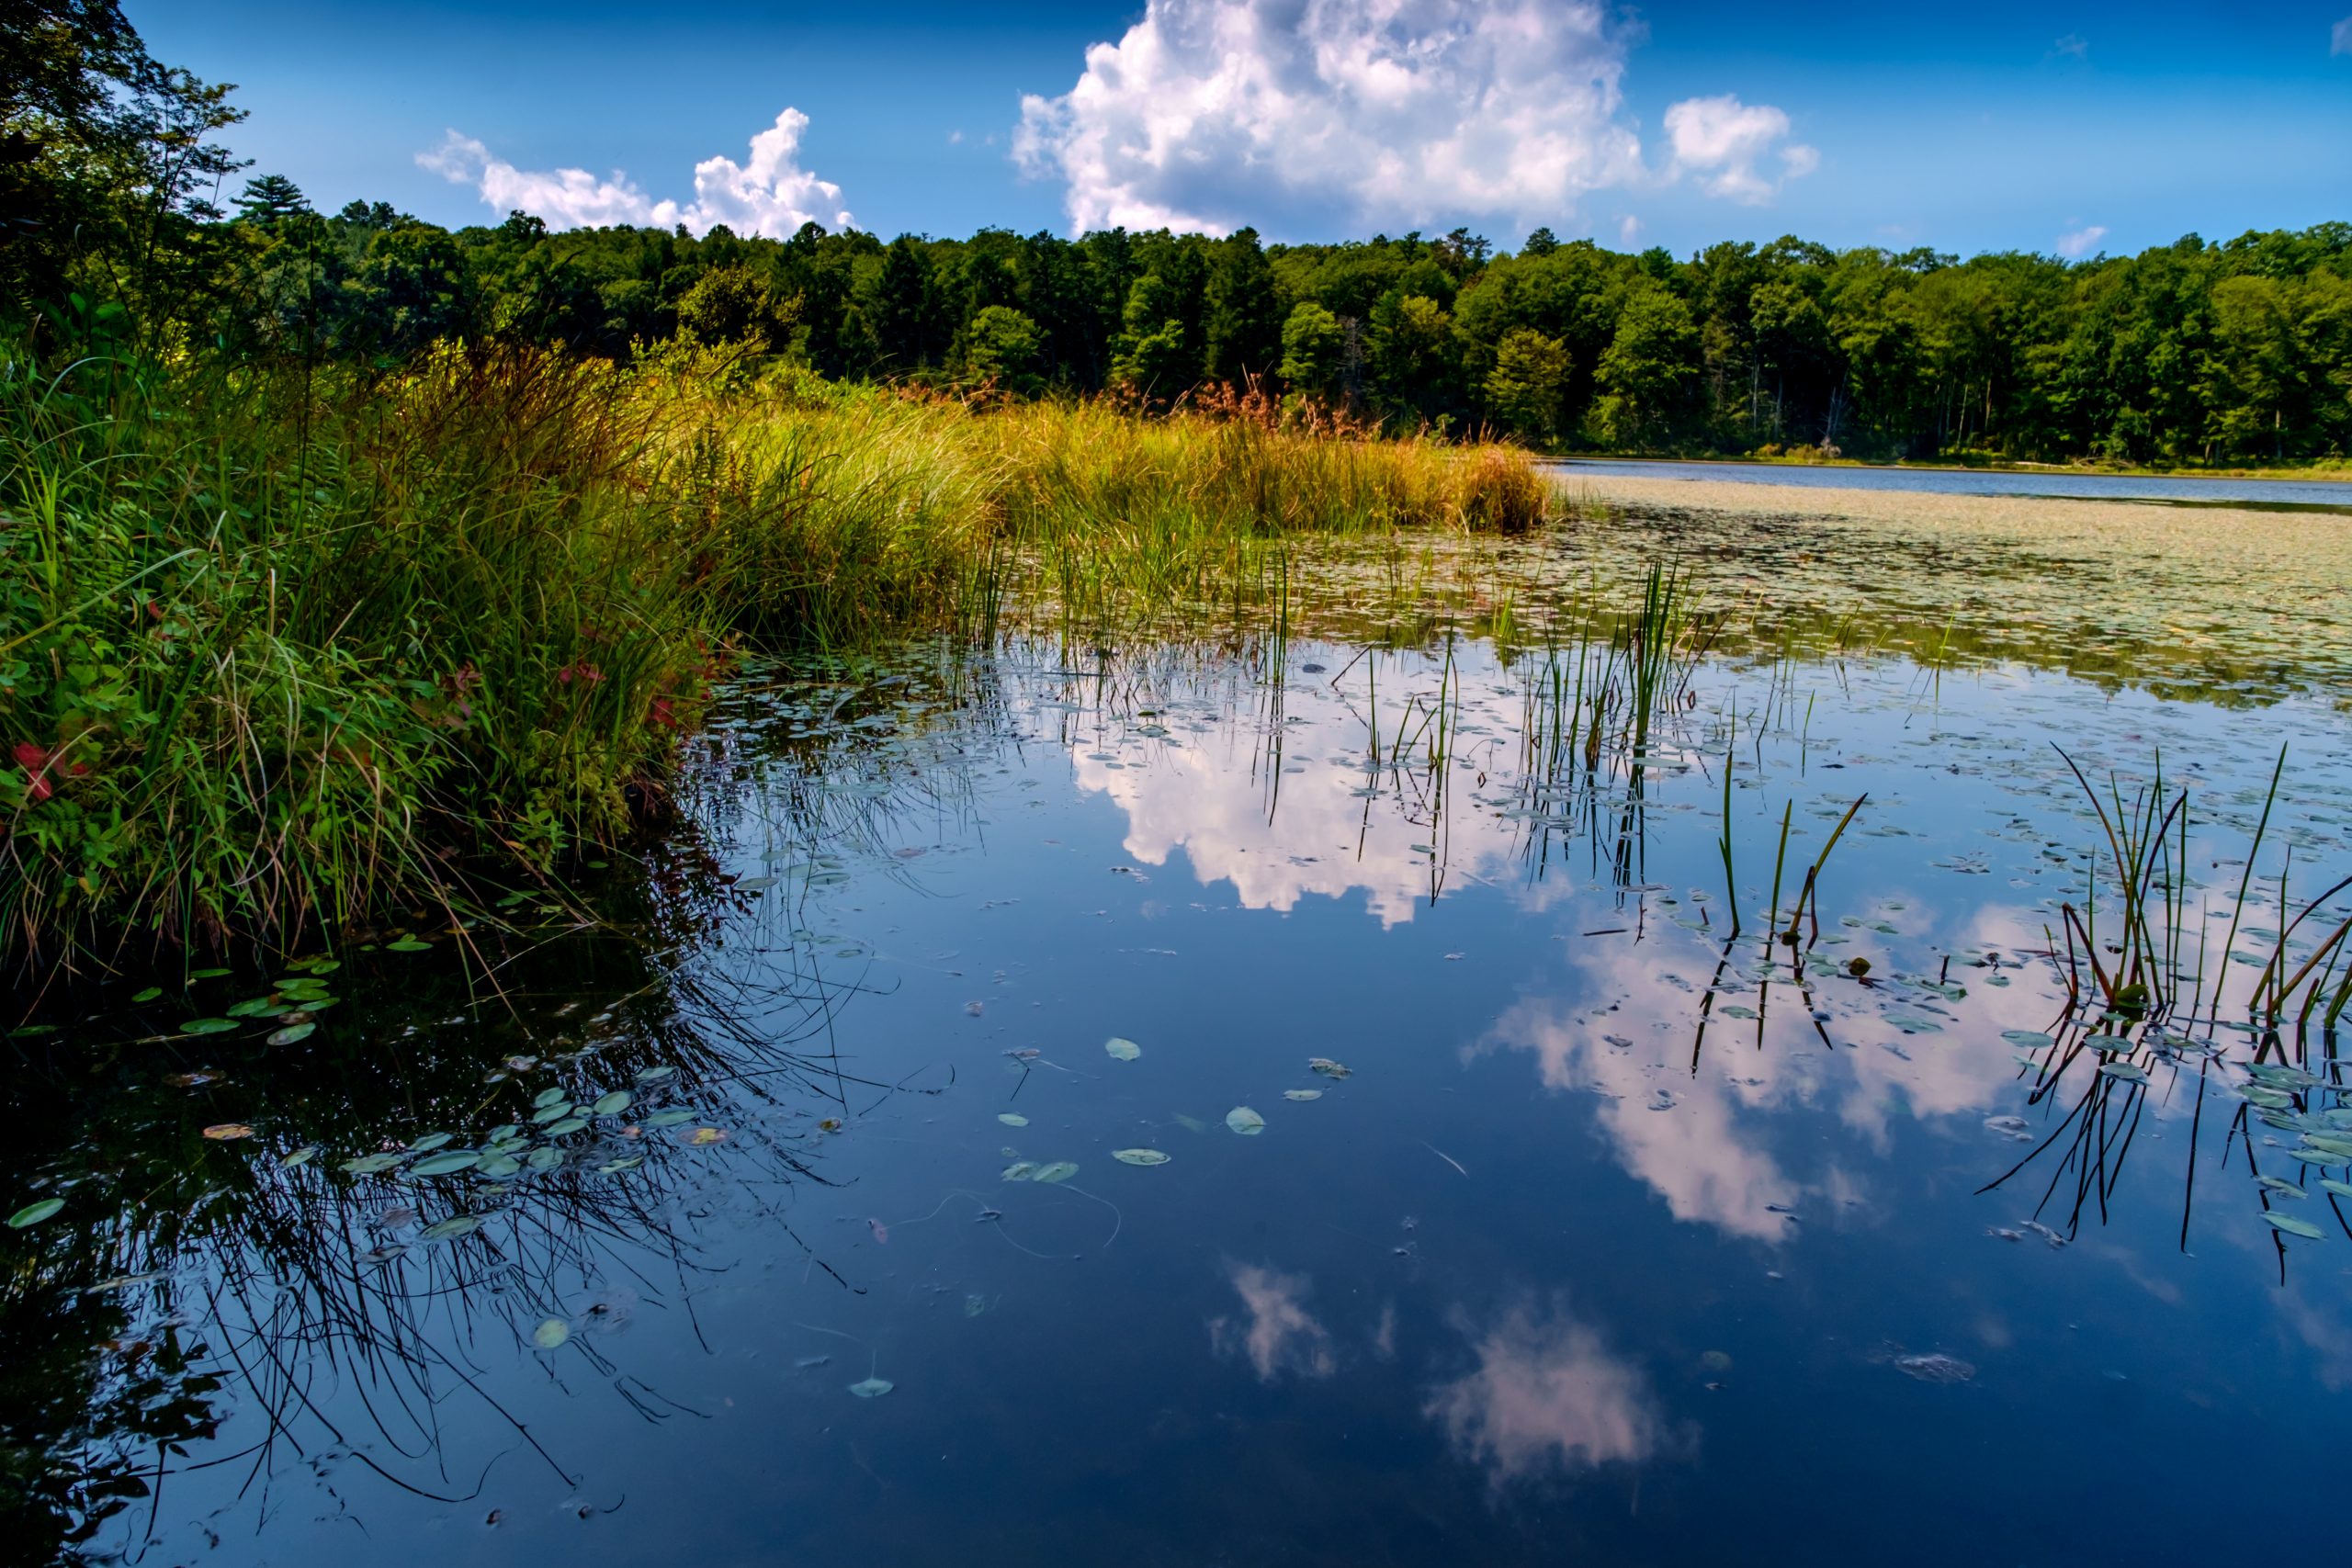 Swamp marsh nature landscape on a bright summer day